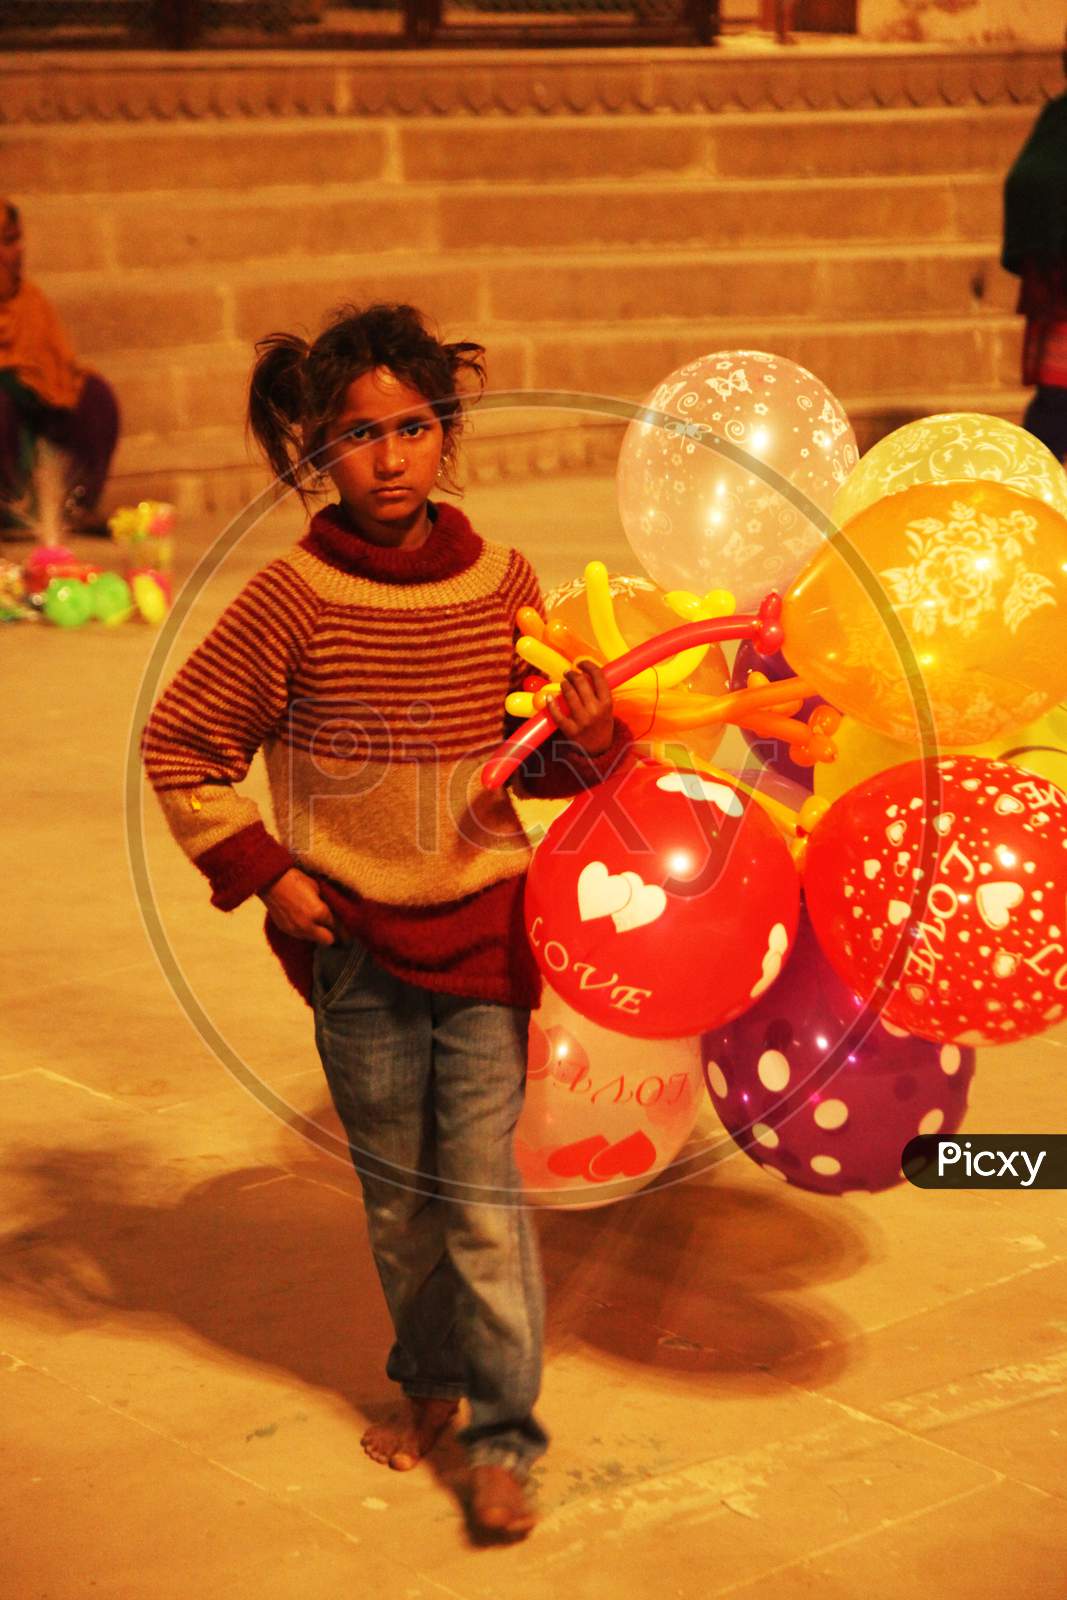 A Small Kid selling Ballons